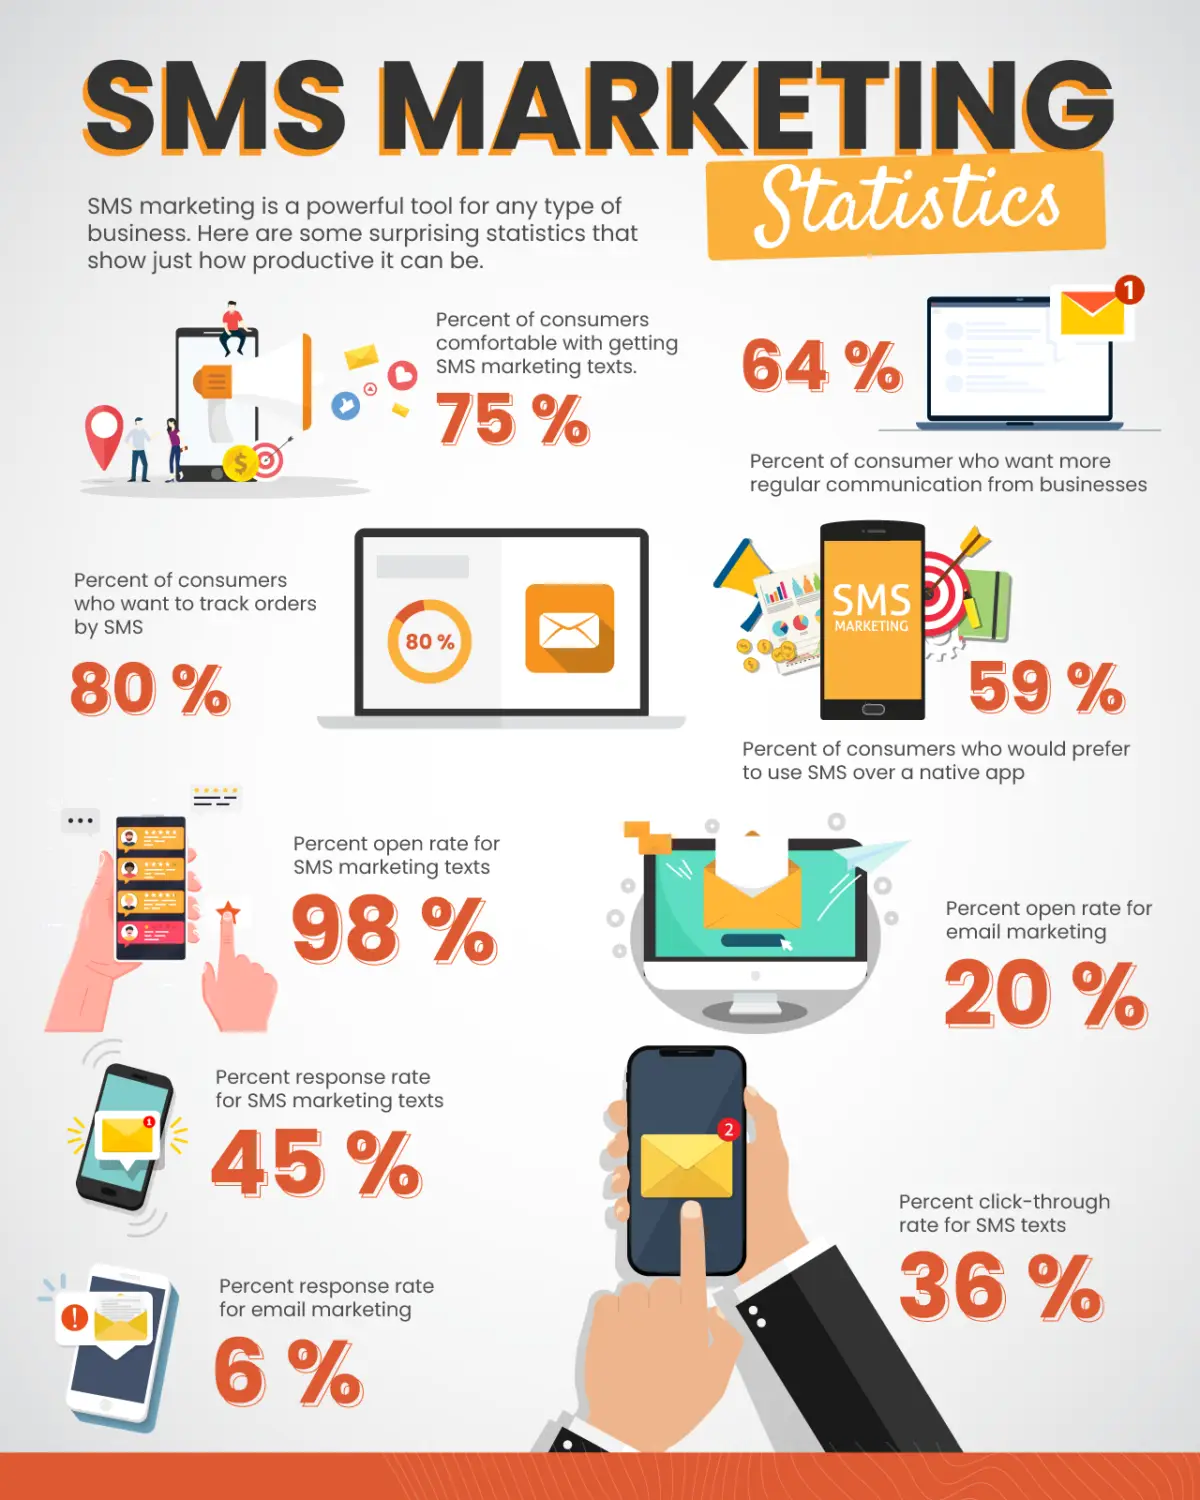 an infographic on SMS marketing statistics